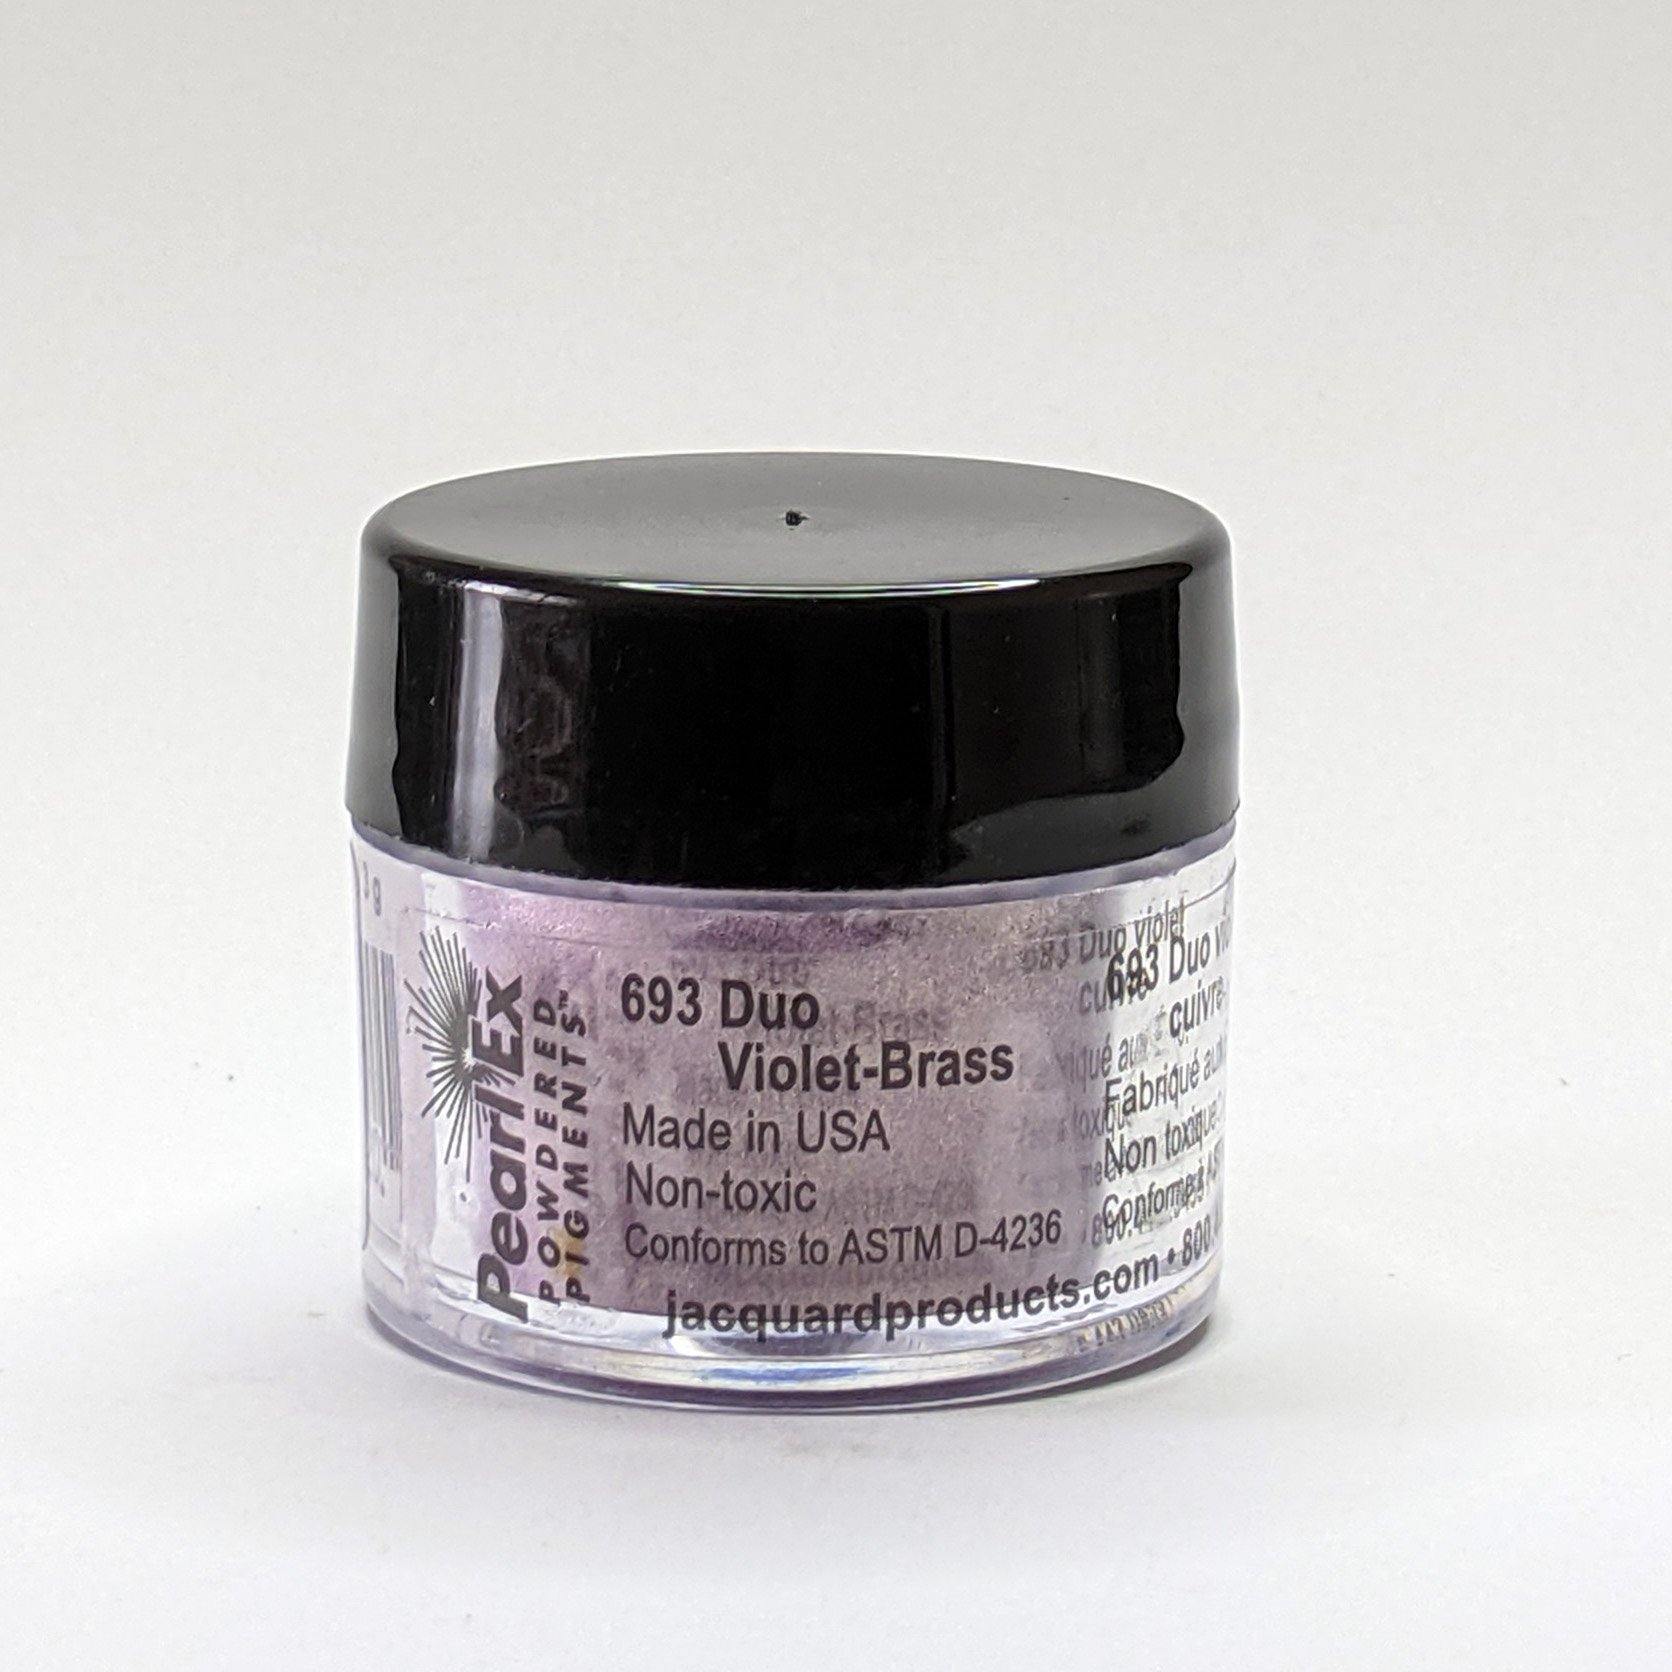 Duo Violet-Brass Pearl Ex Pigment 3g - Poethan